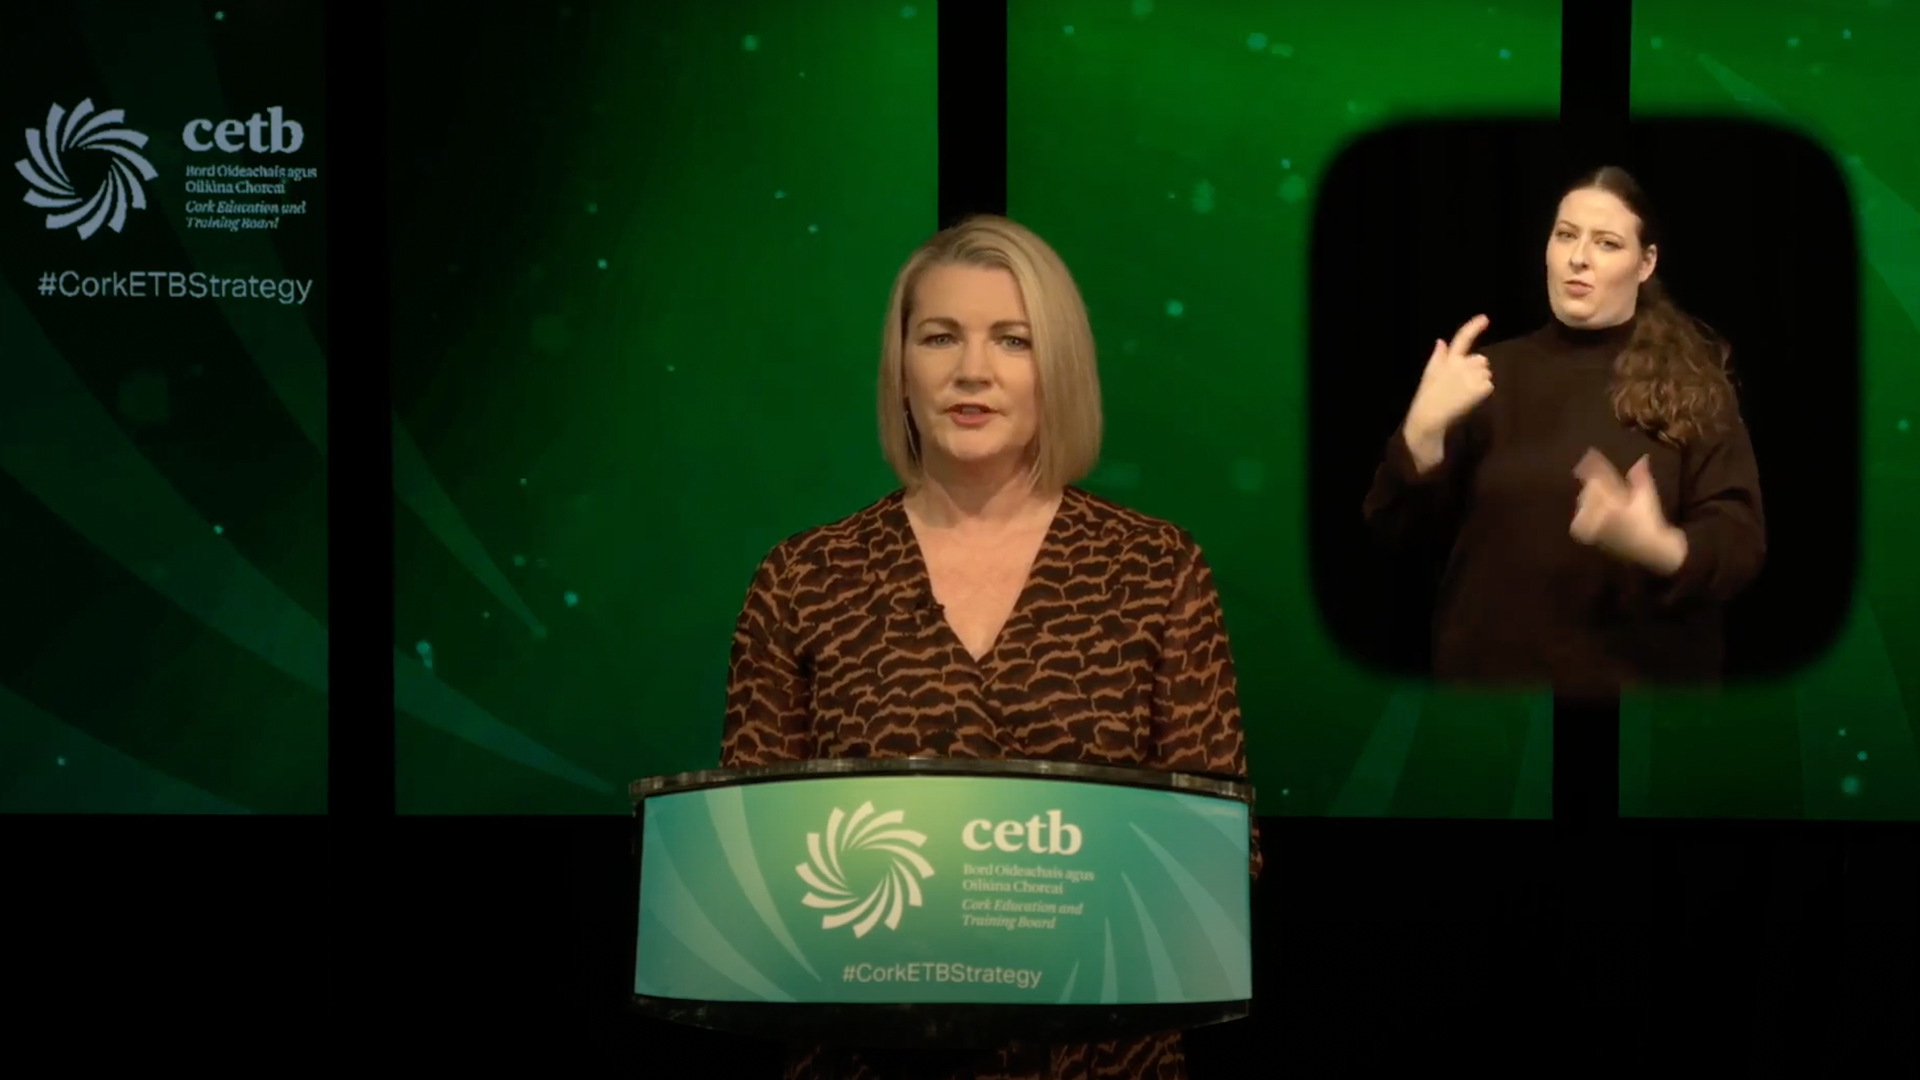 Cork ETB event was recorded in the POD studio, a sign language person was brought in separately to interpret the event. A number of dial in recording and video submissions were arranged for the event.